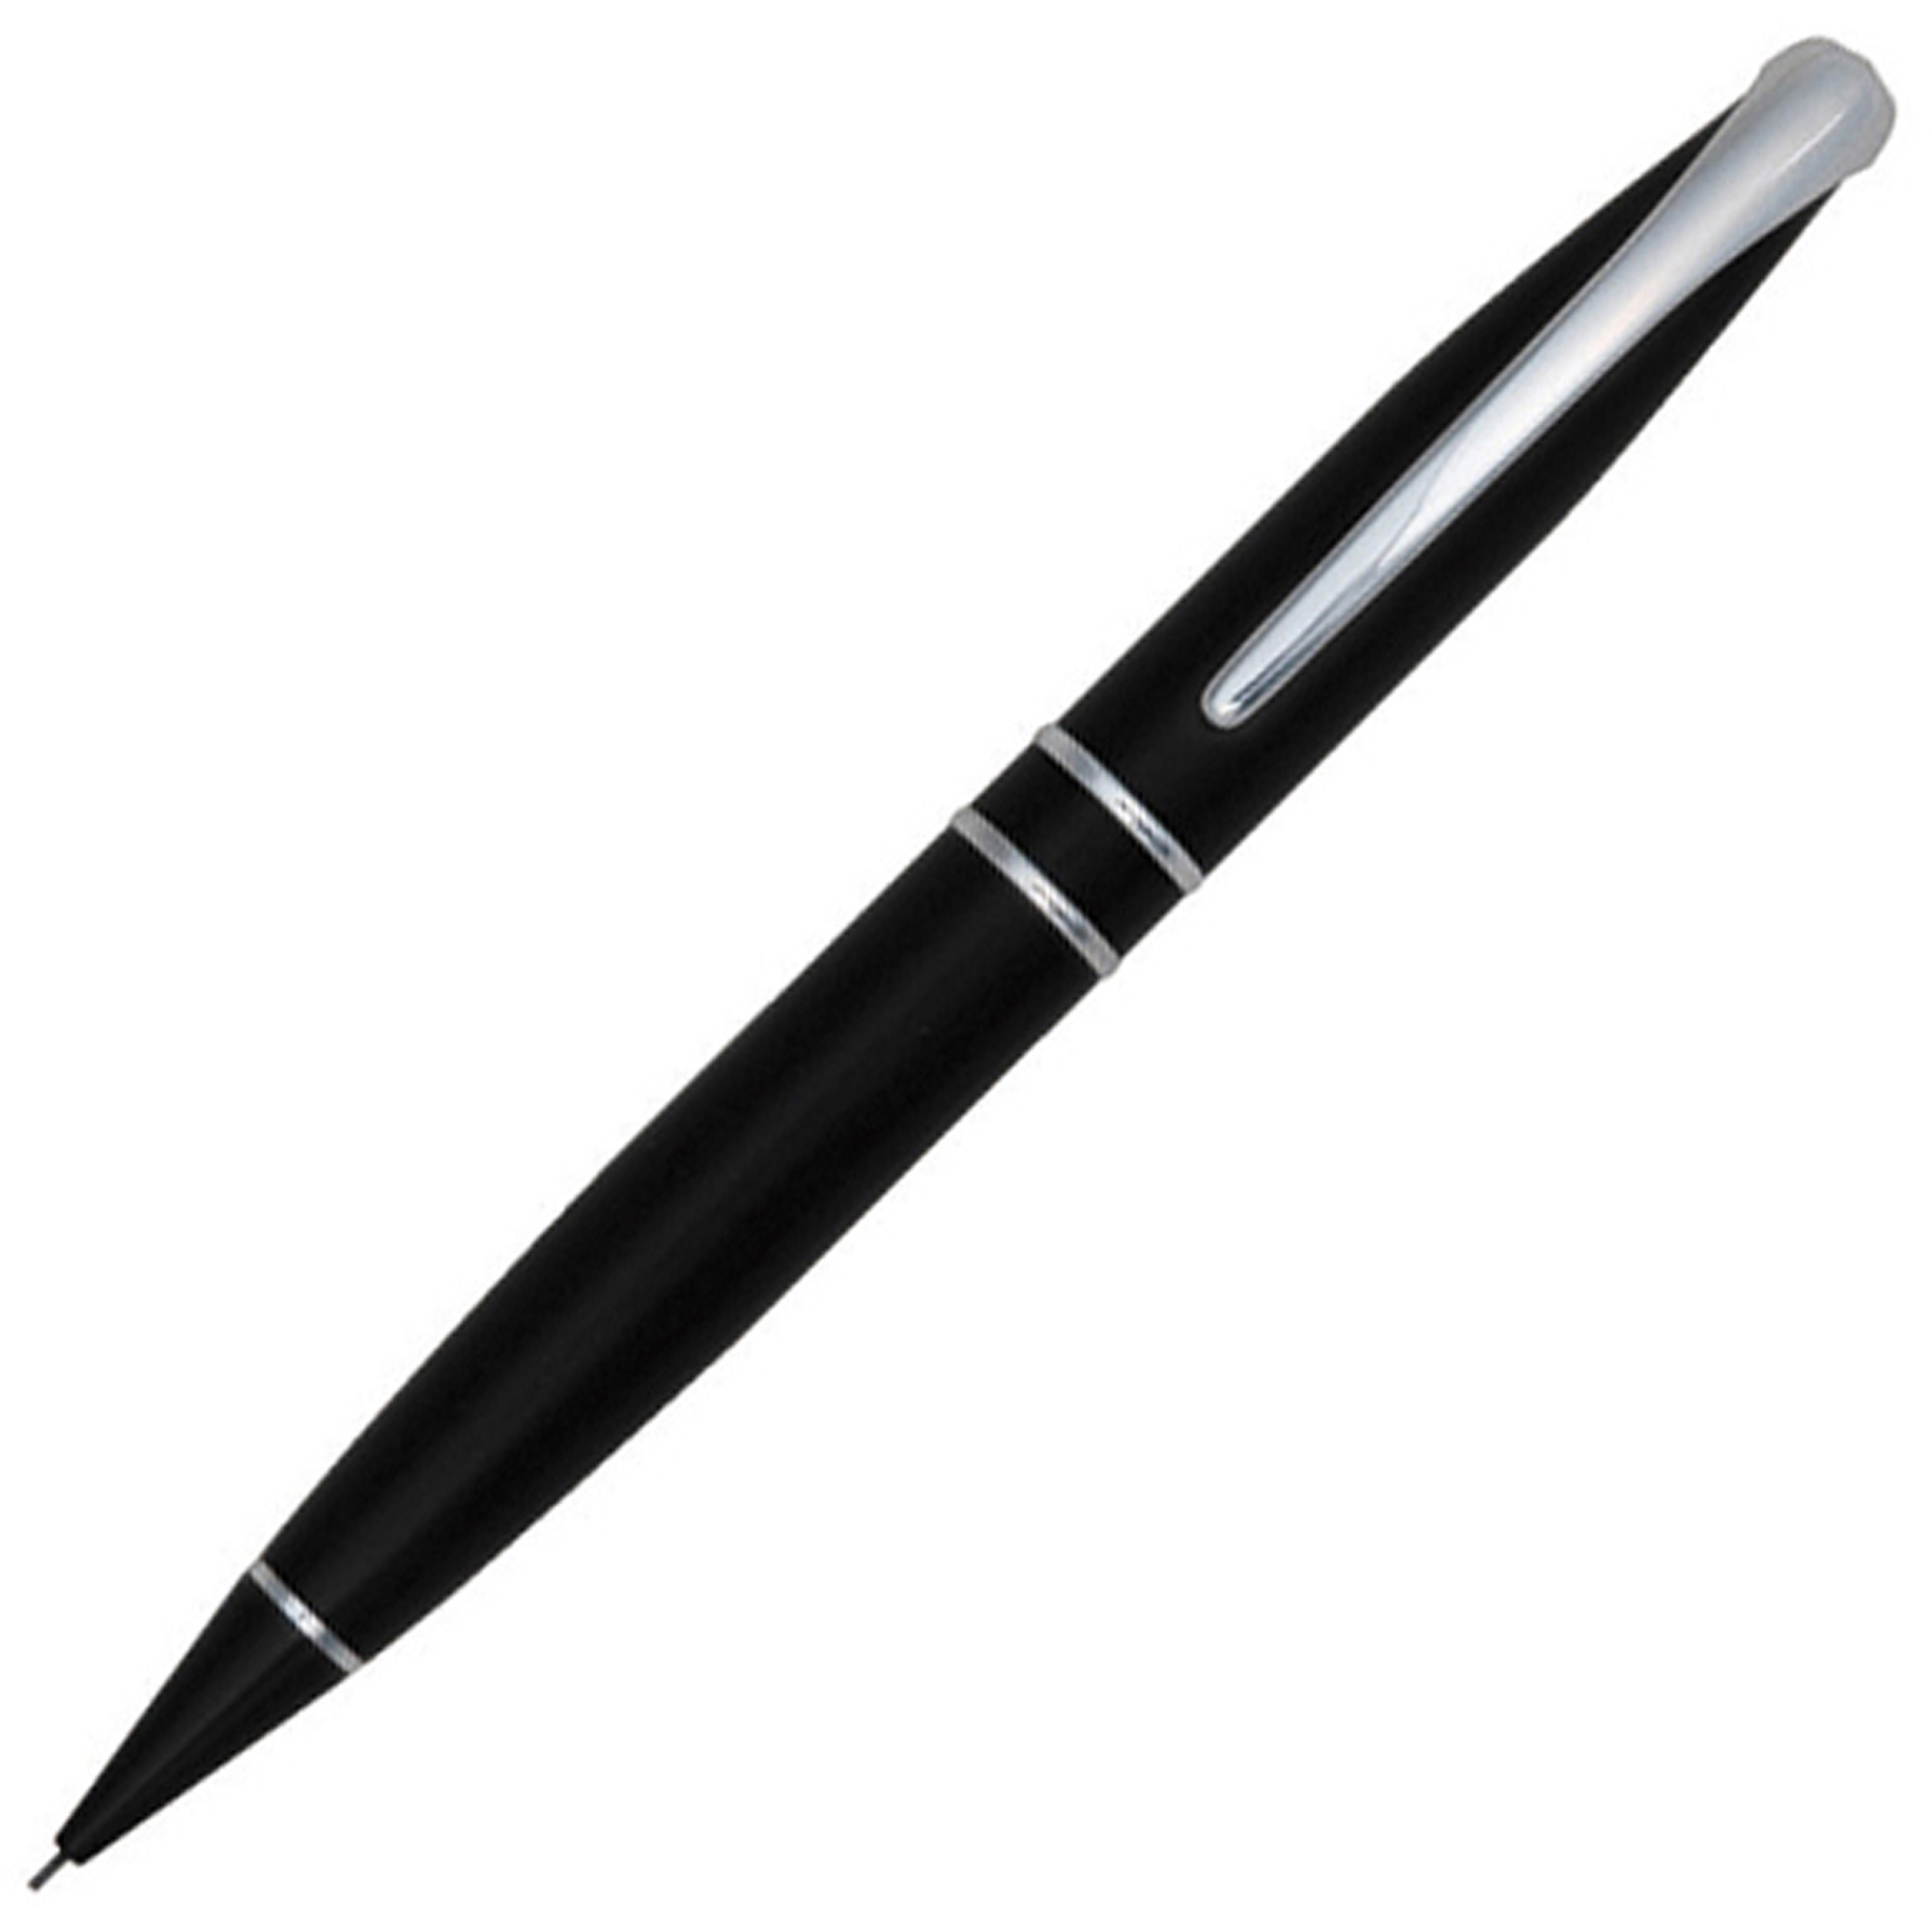 Waterford Mech Pencil (Chrome Undercoat)